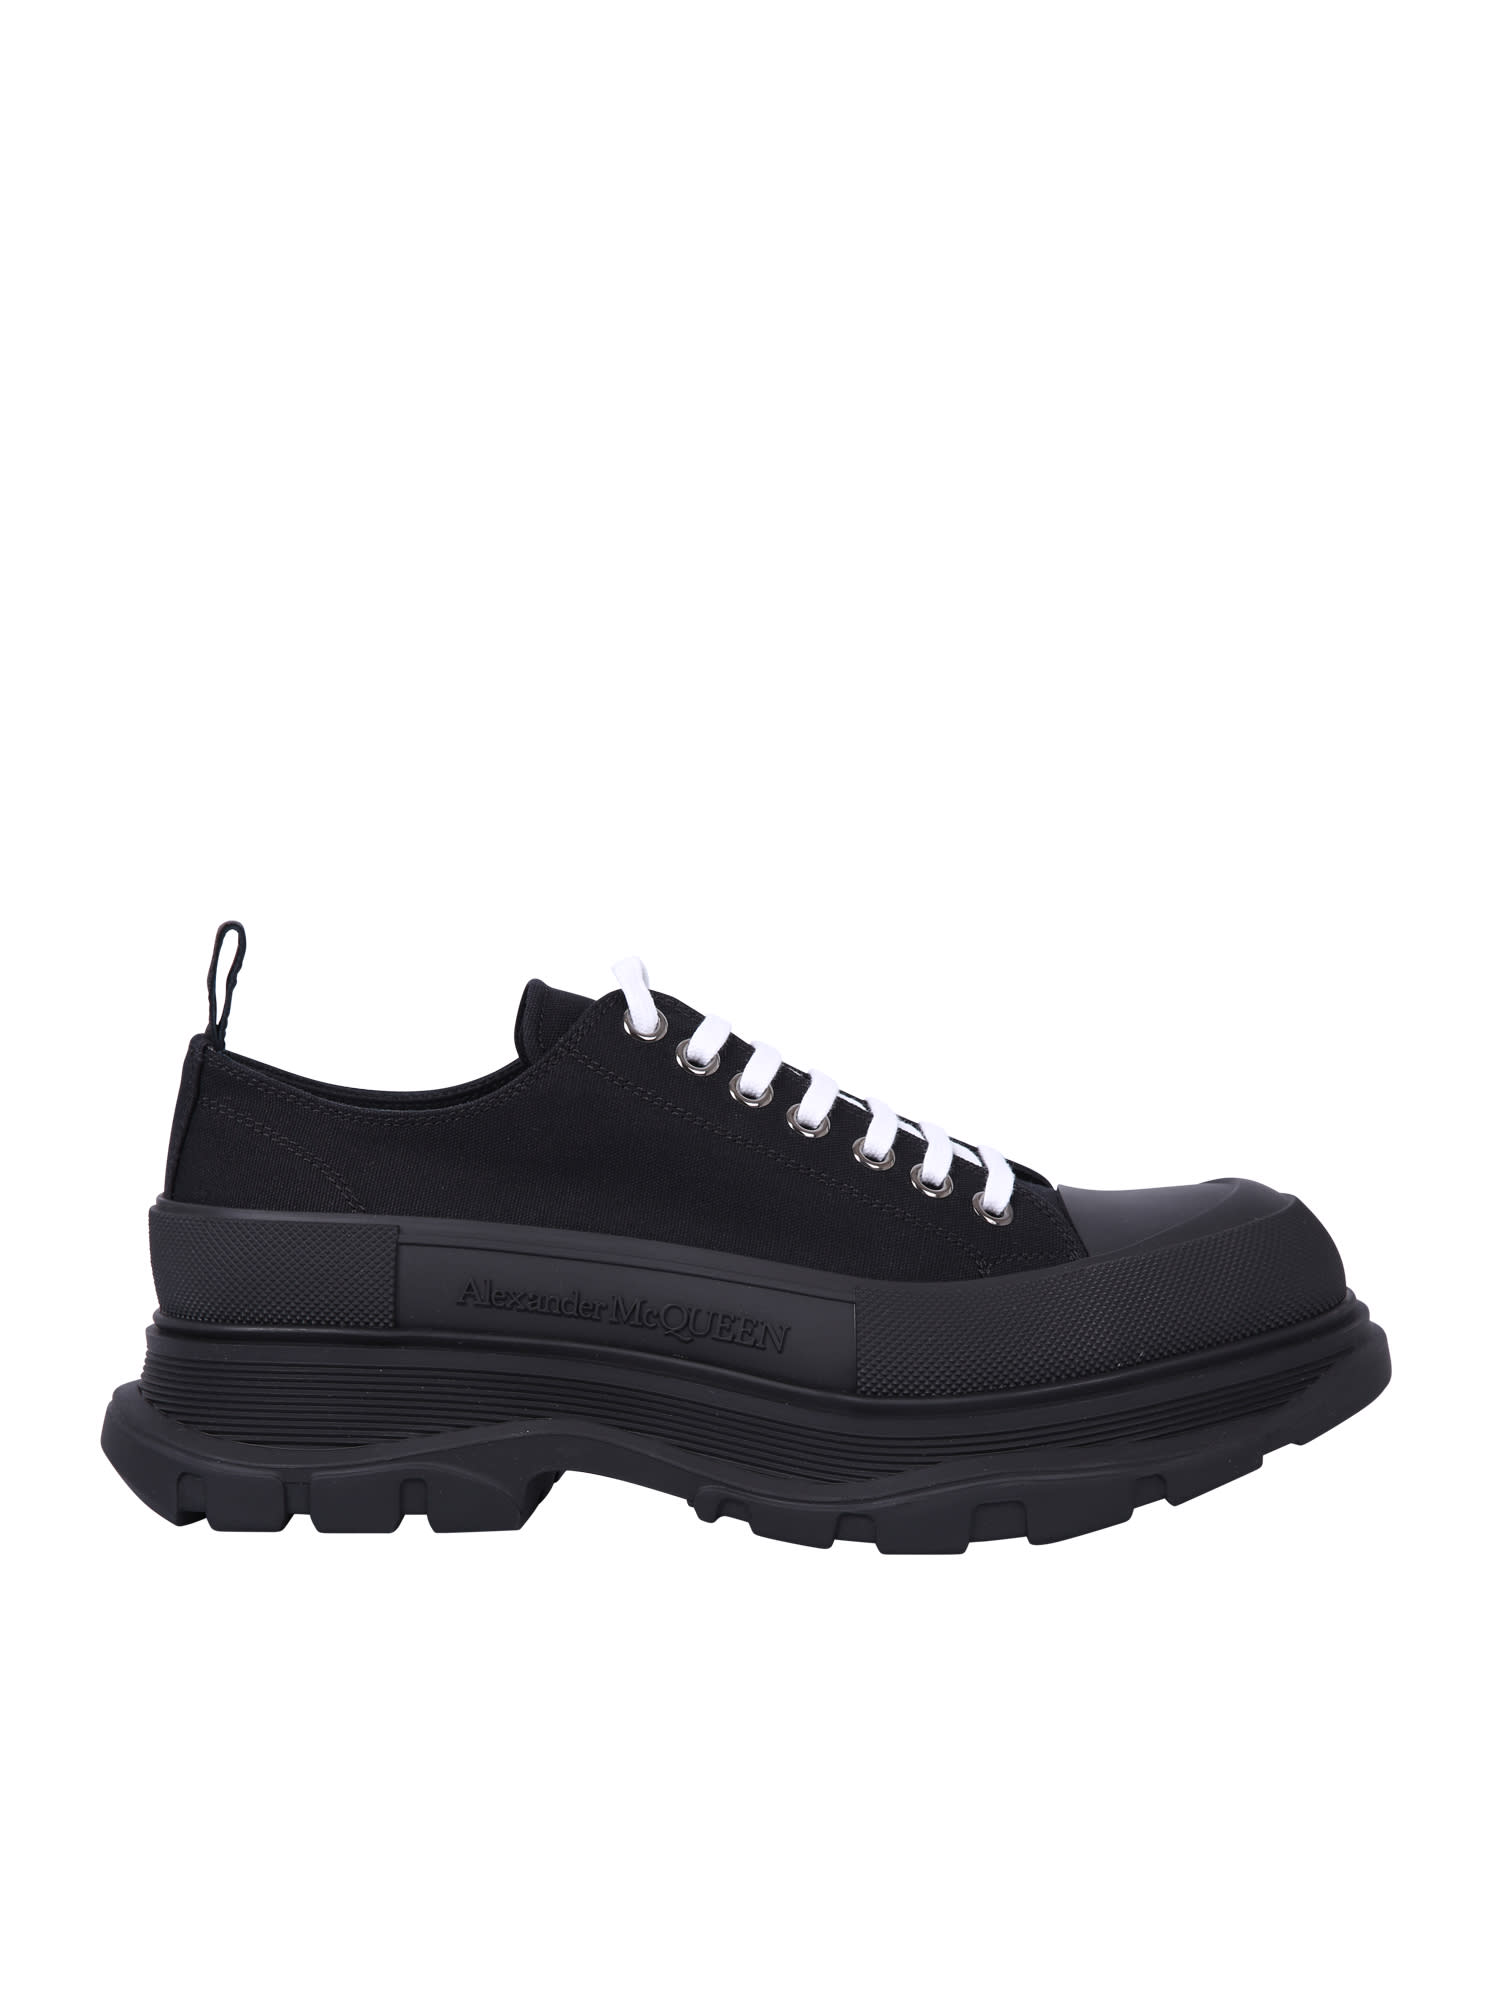 ALEXANDER MCQUEEN LACE UP SNEAKERS,604257 W4L32 1000